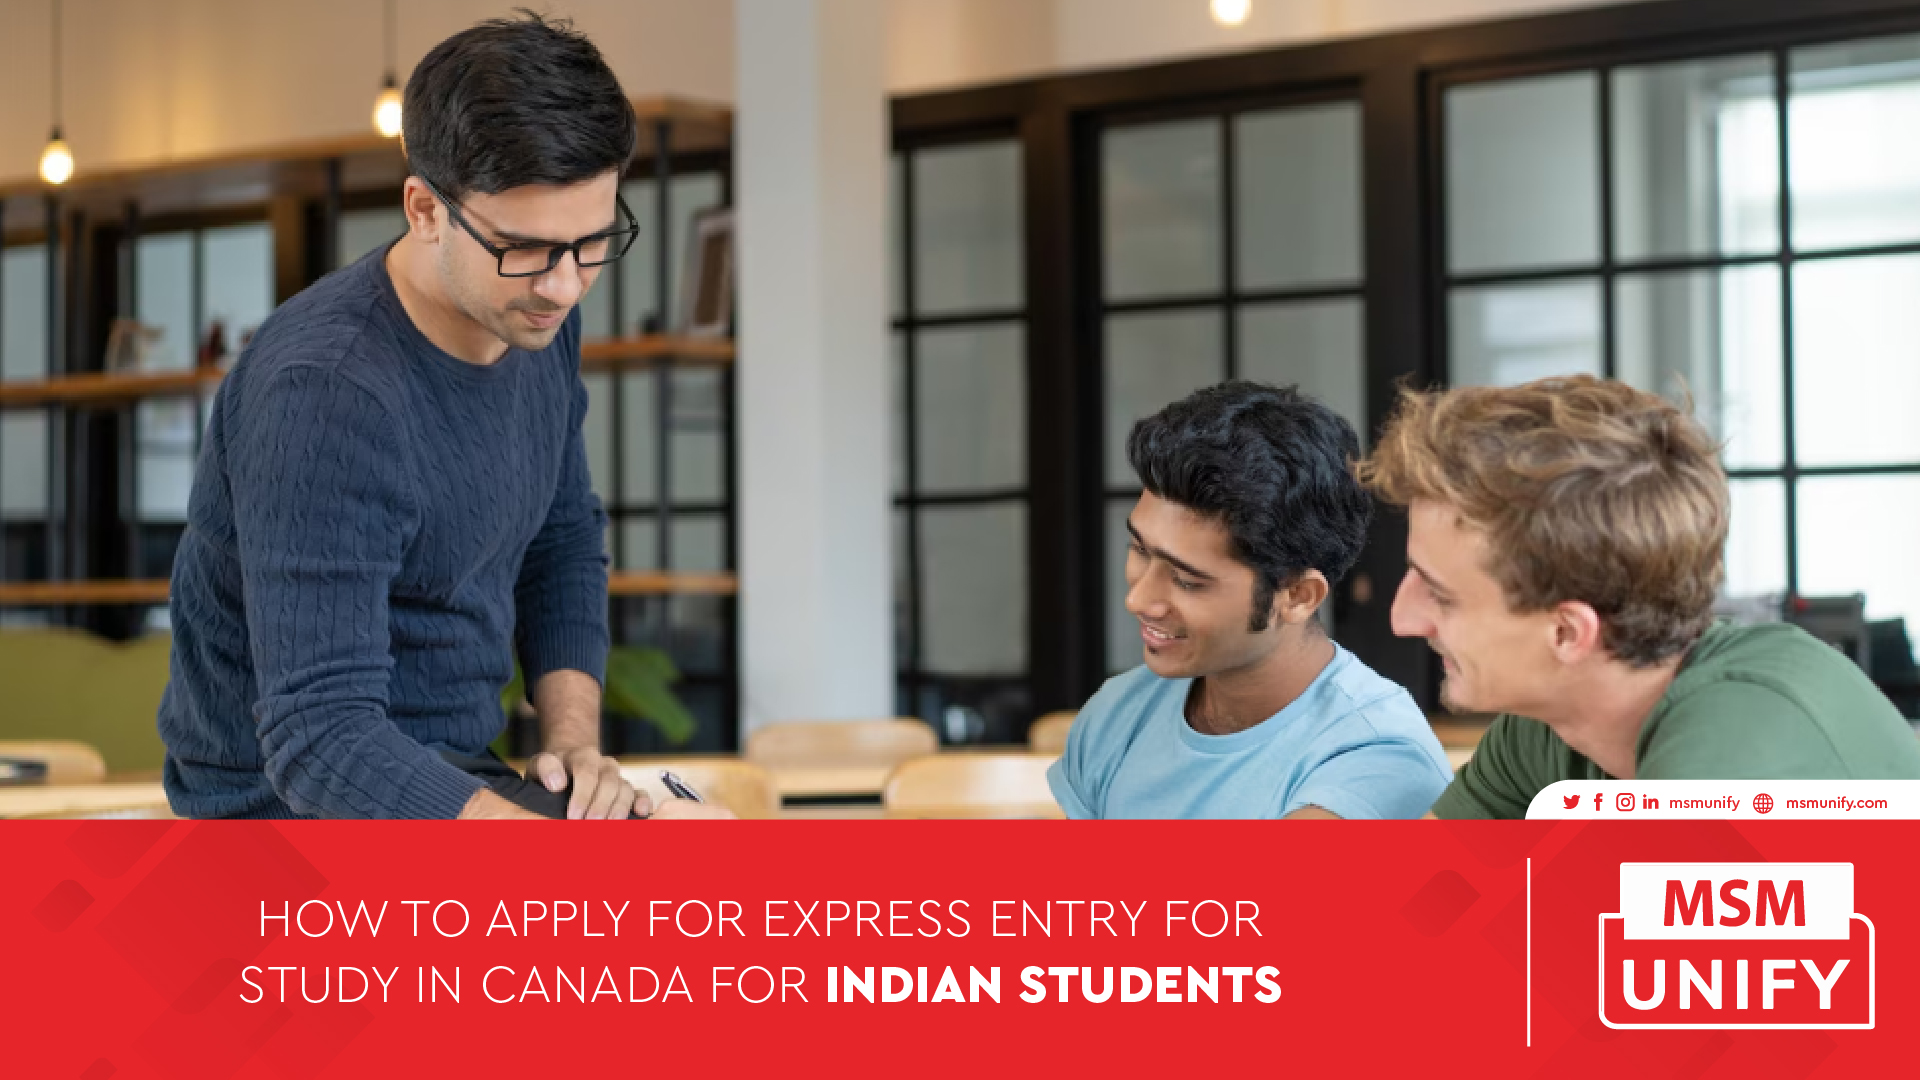 How to Apply for Express Entry for Study in Canada